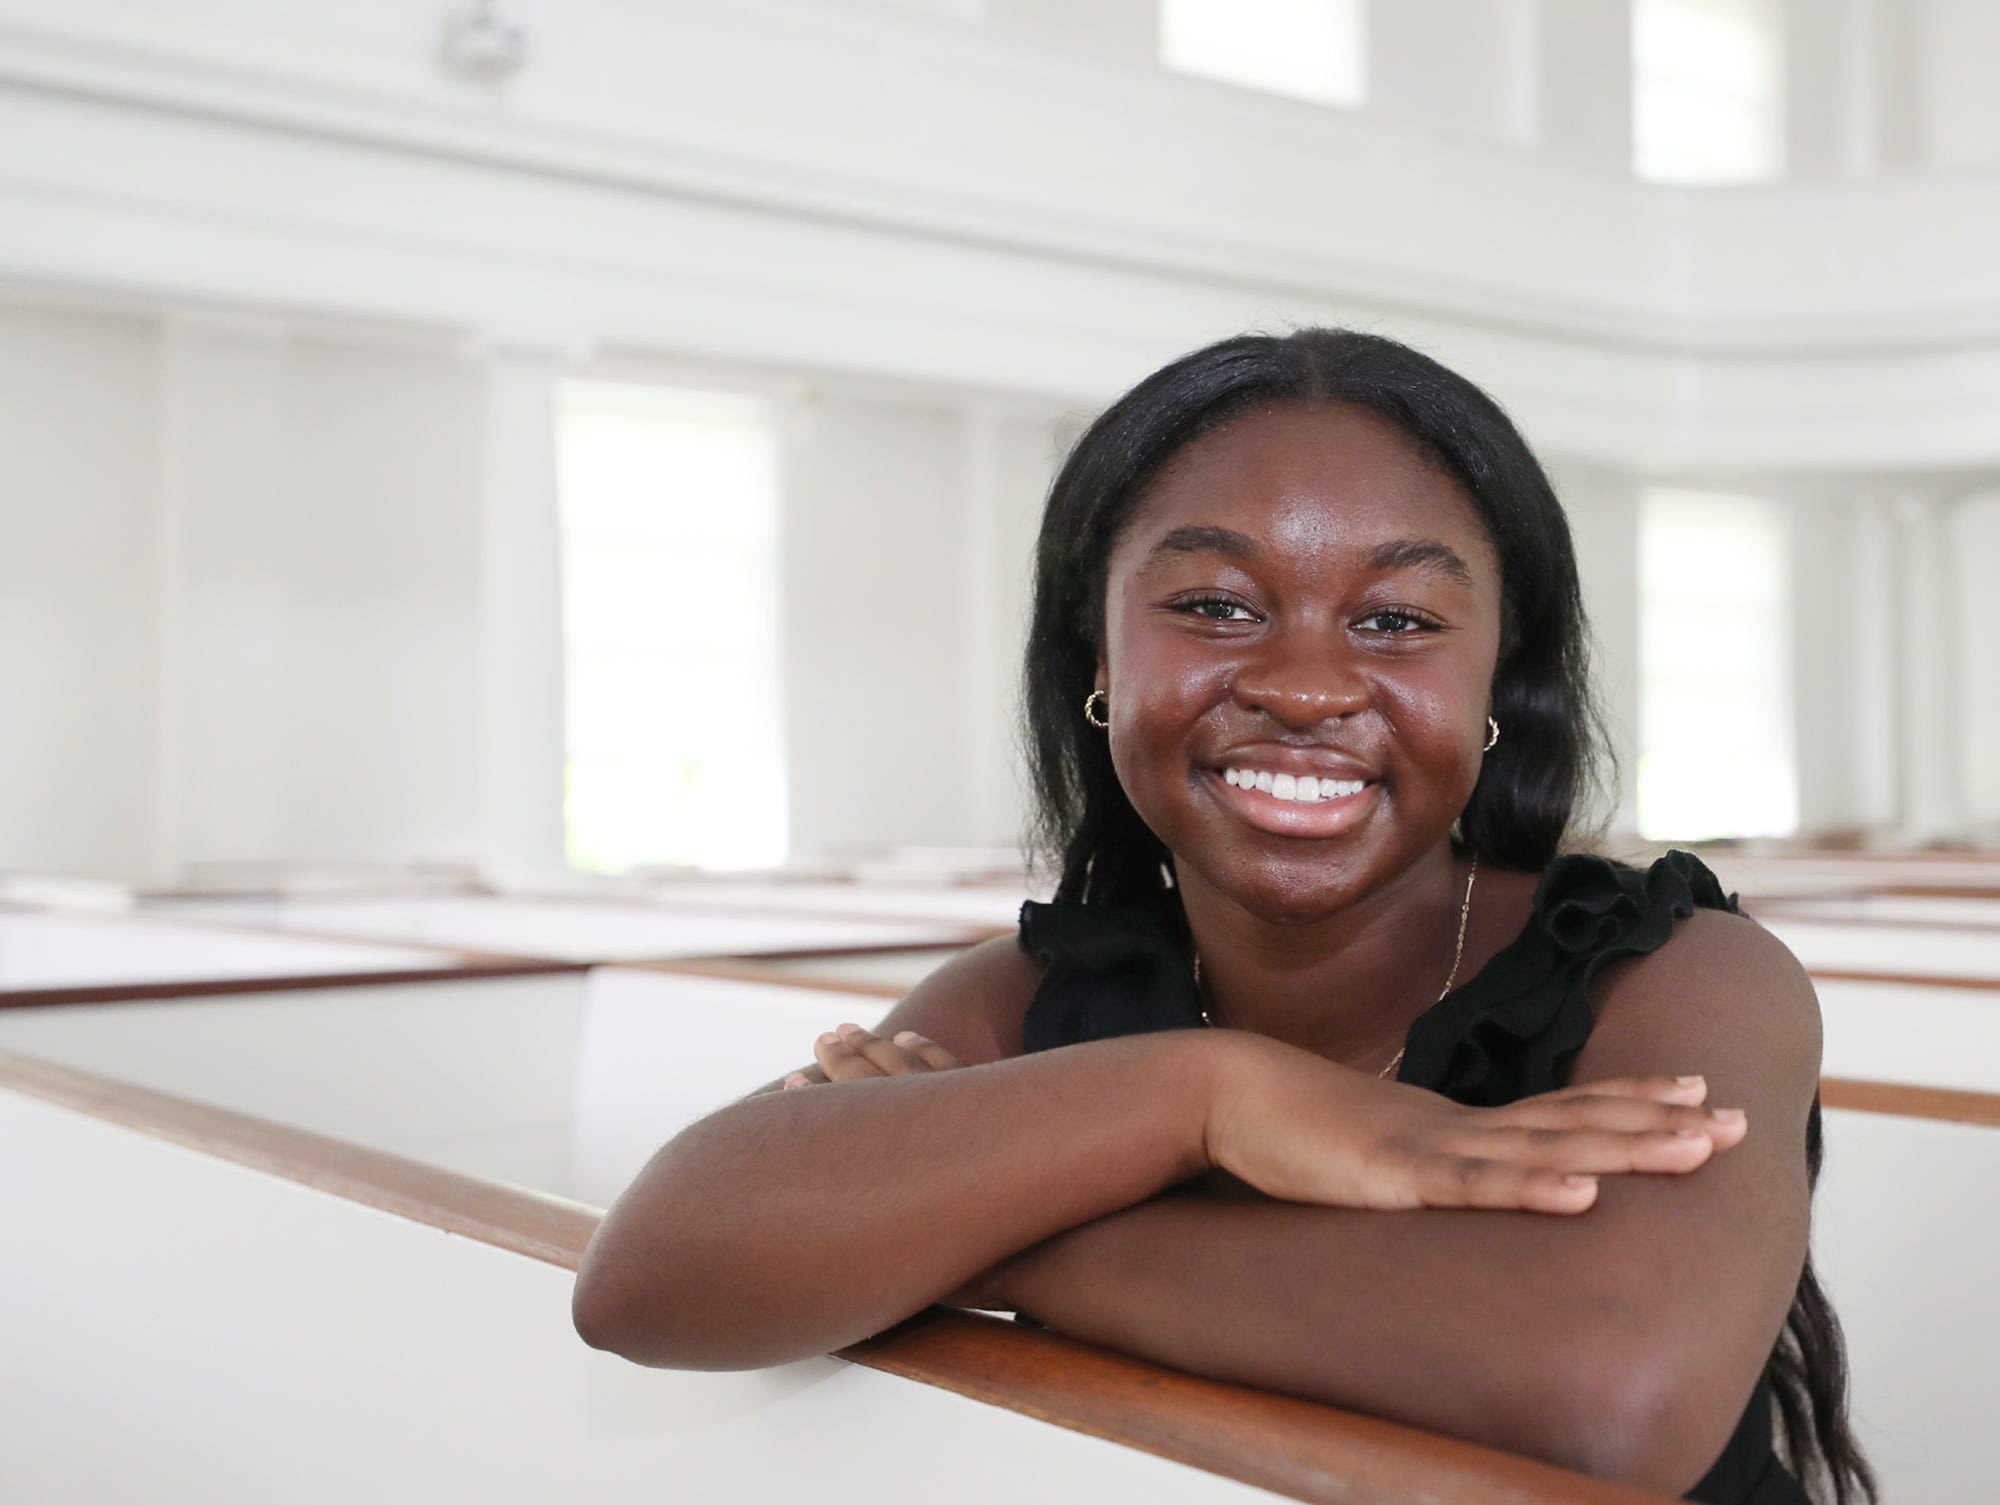 Putting her heart into it: Star Student Nana Kyei leads hypertension clinic in Ghana